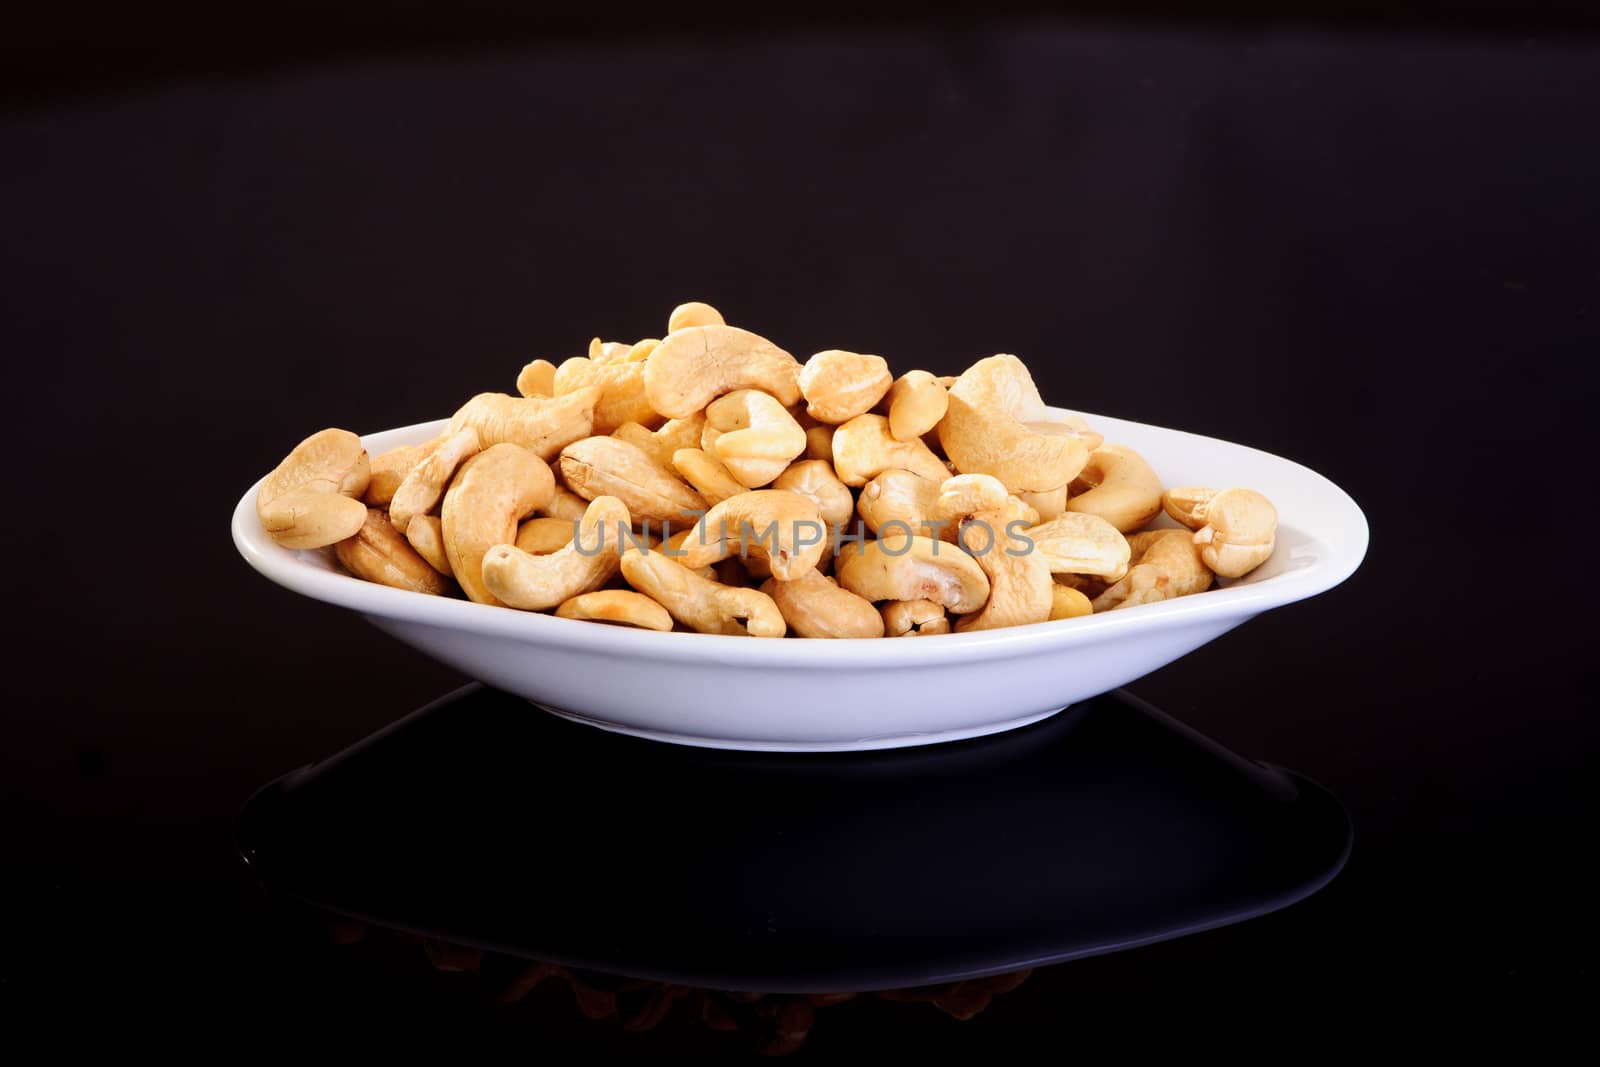 Raw Cashew Nuts in a white plate on a black background